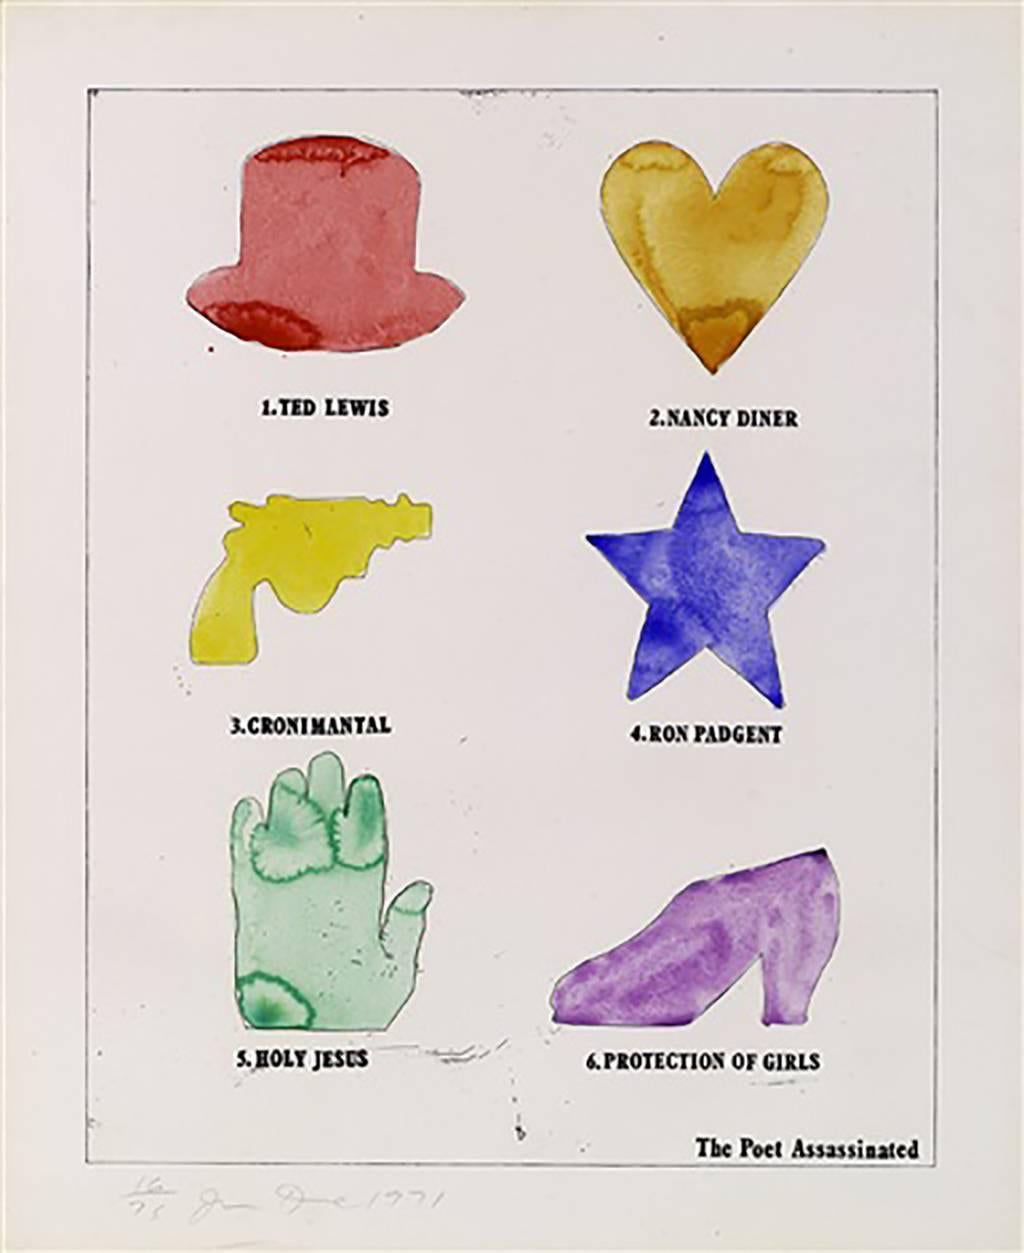 The Poet Assassinated - Print by Jim Dine